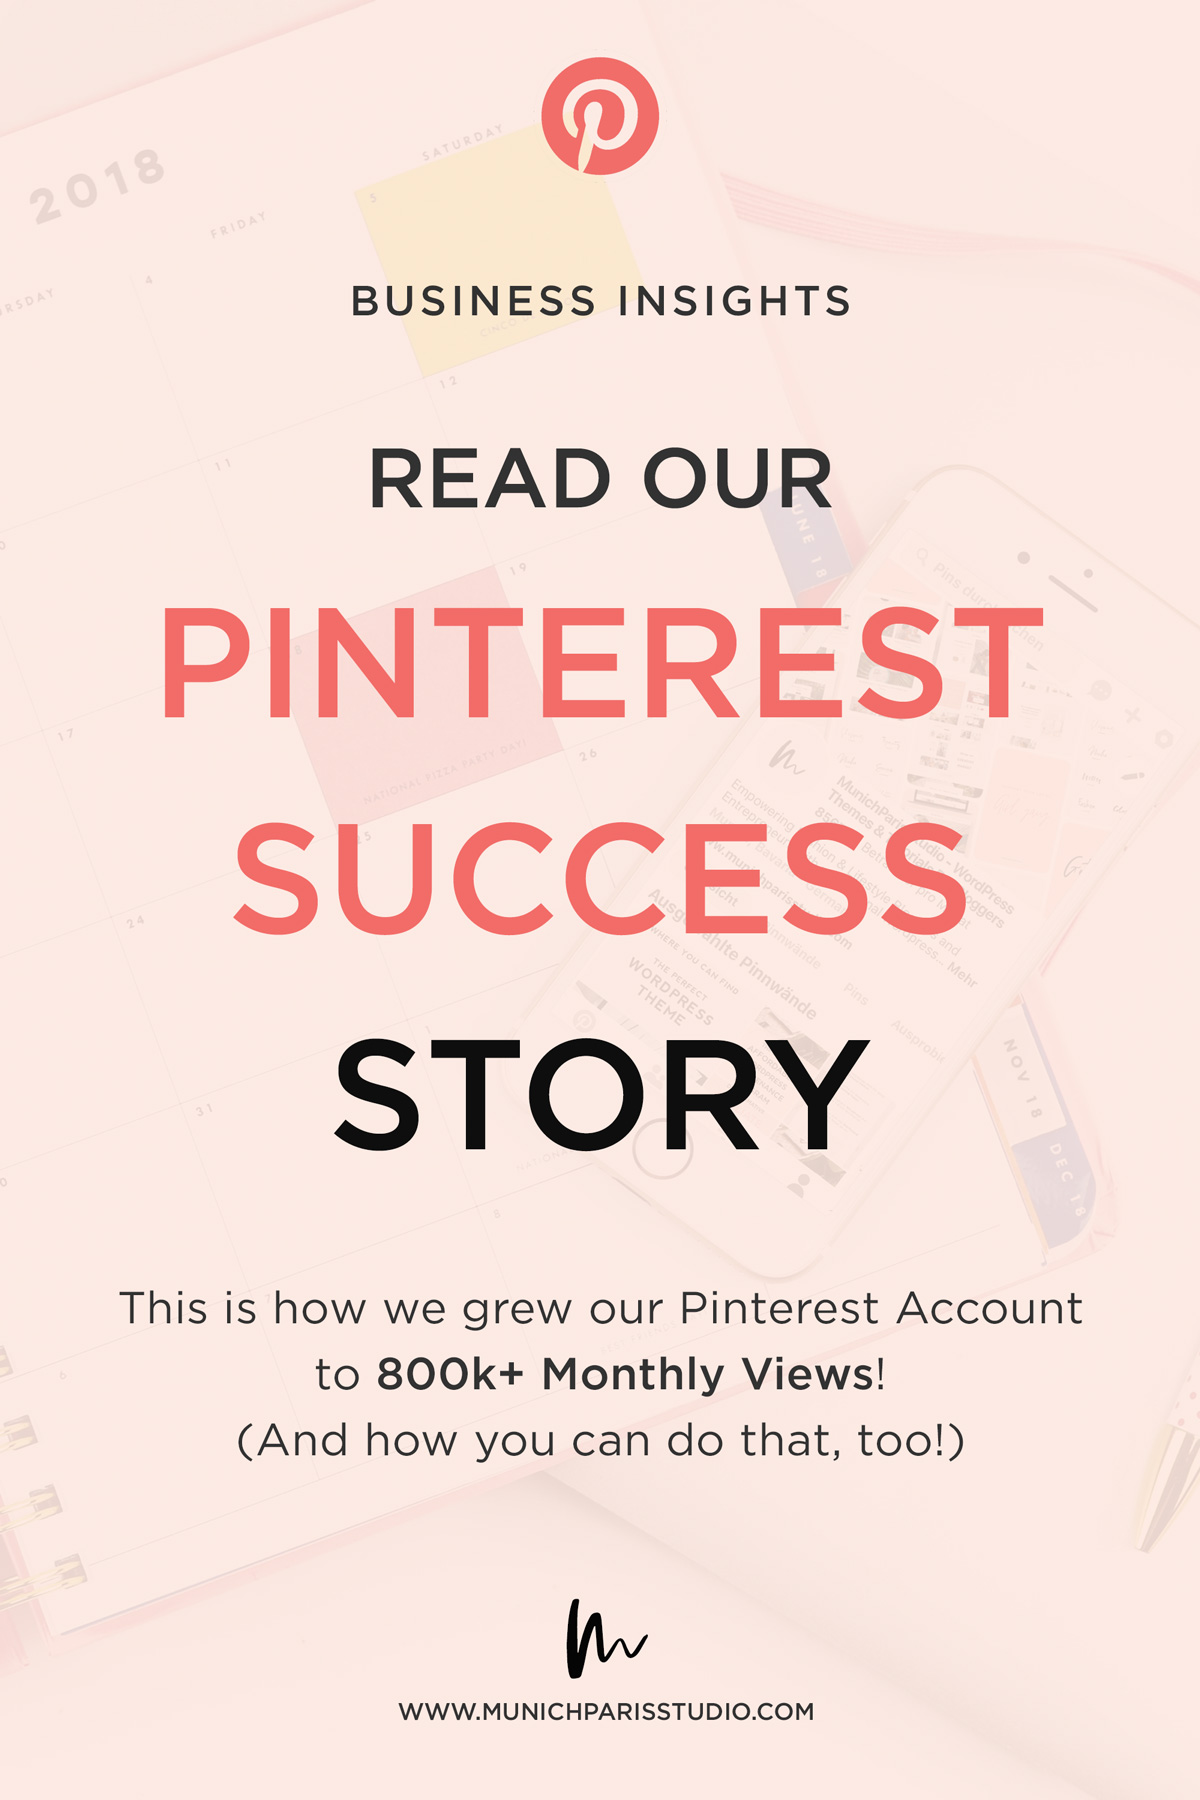 How we grew our Pinterest Business Account to 1 Million Views per Month - read our Pinterest Success Story and discover our Pinning Strategy and favorite Pinterest Tools for Business